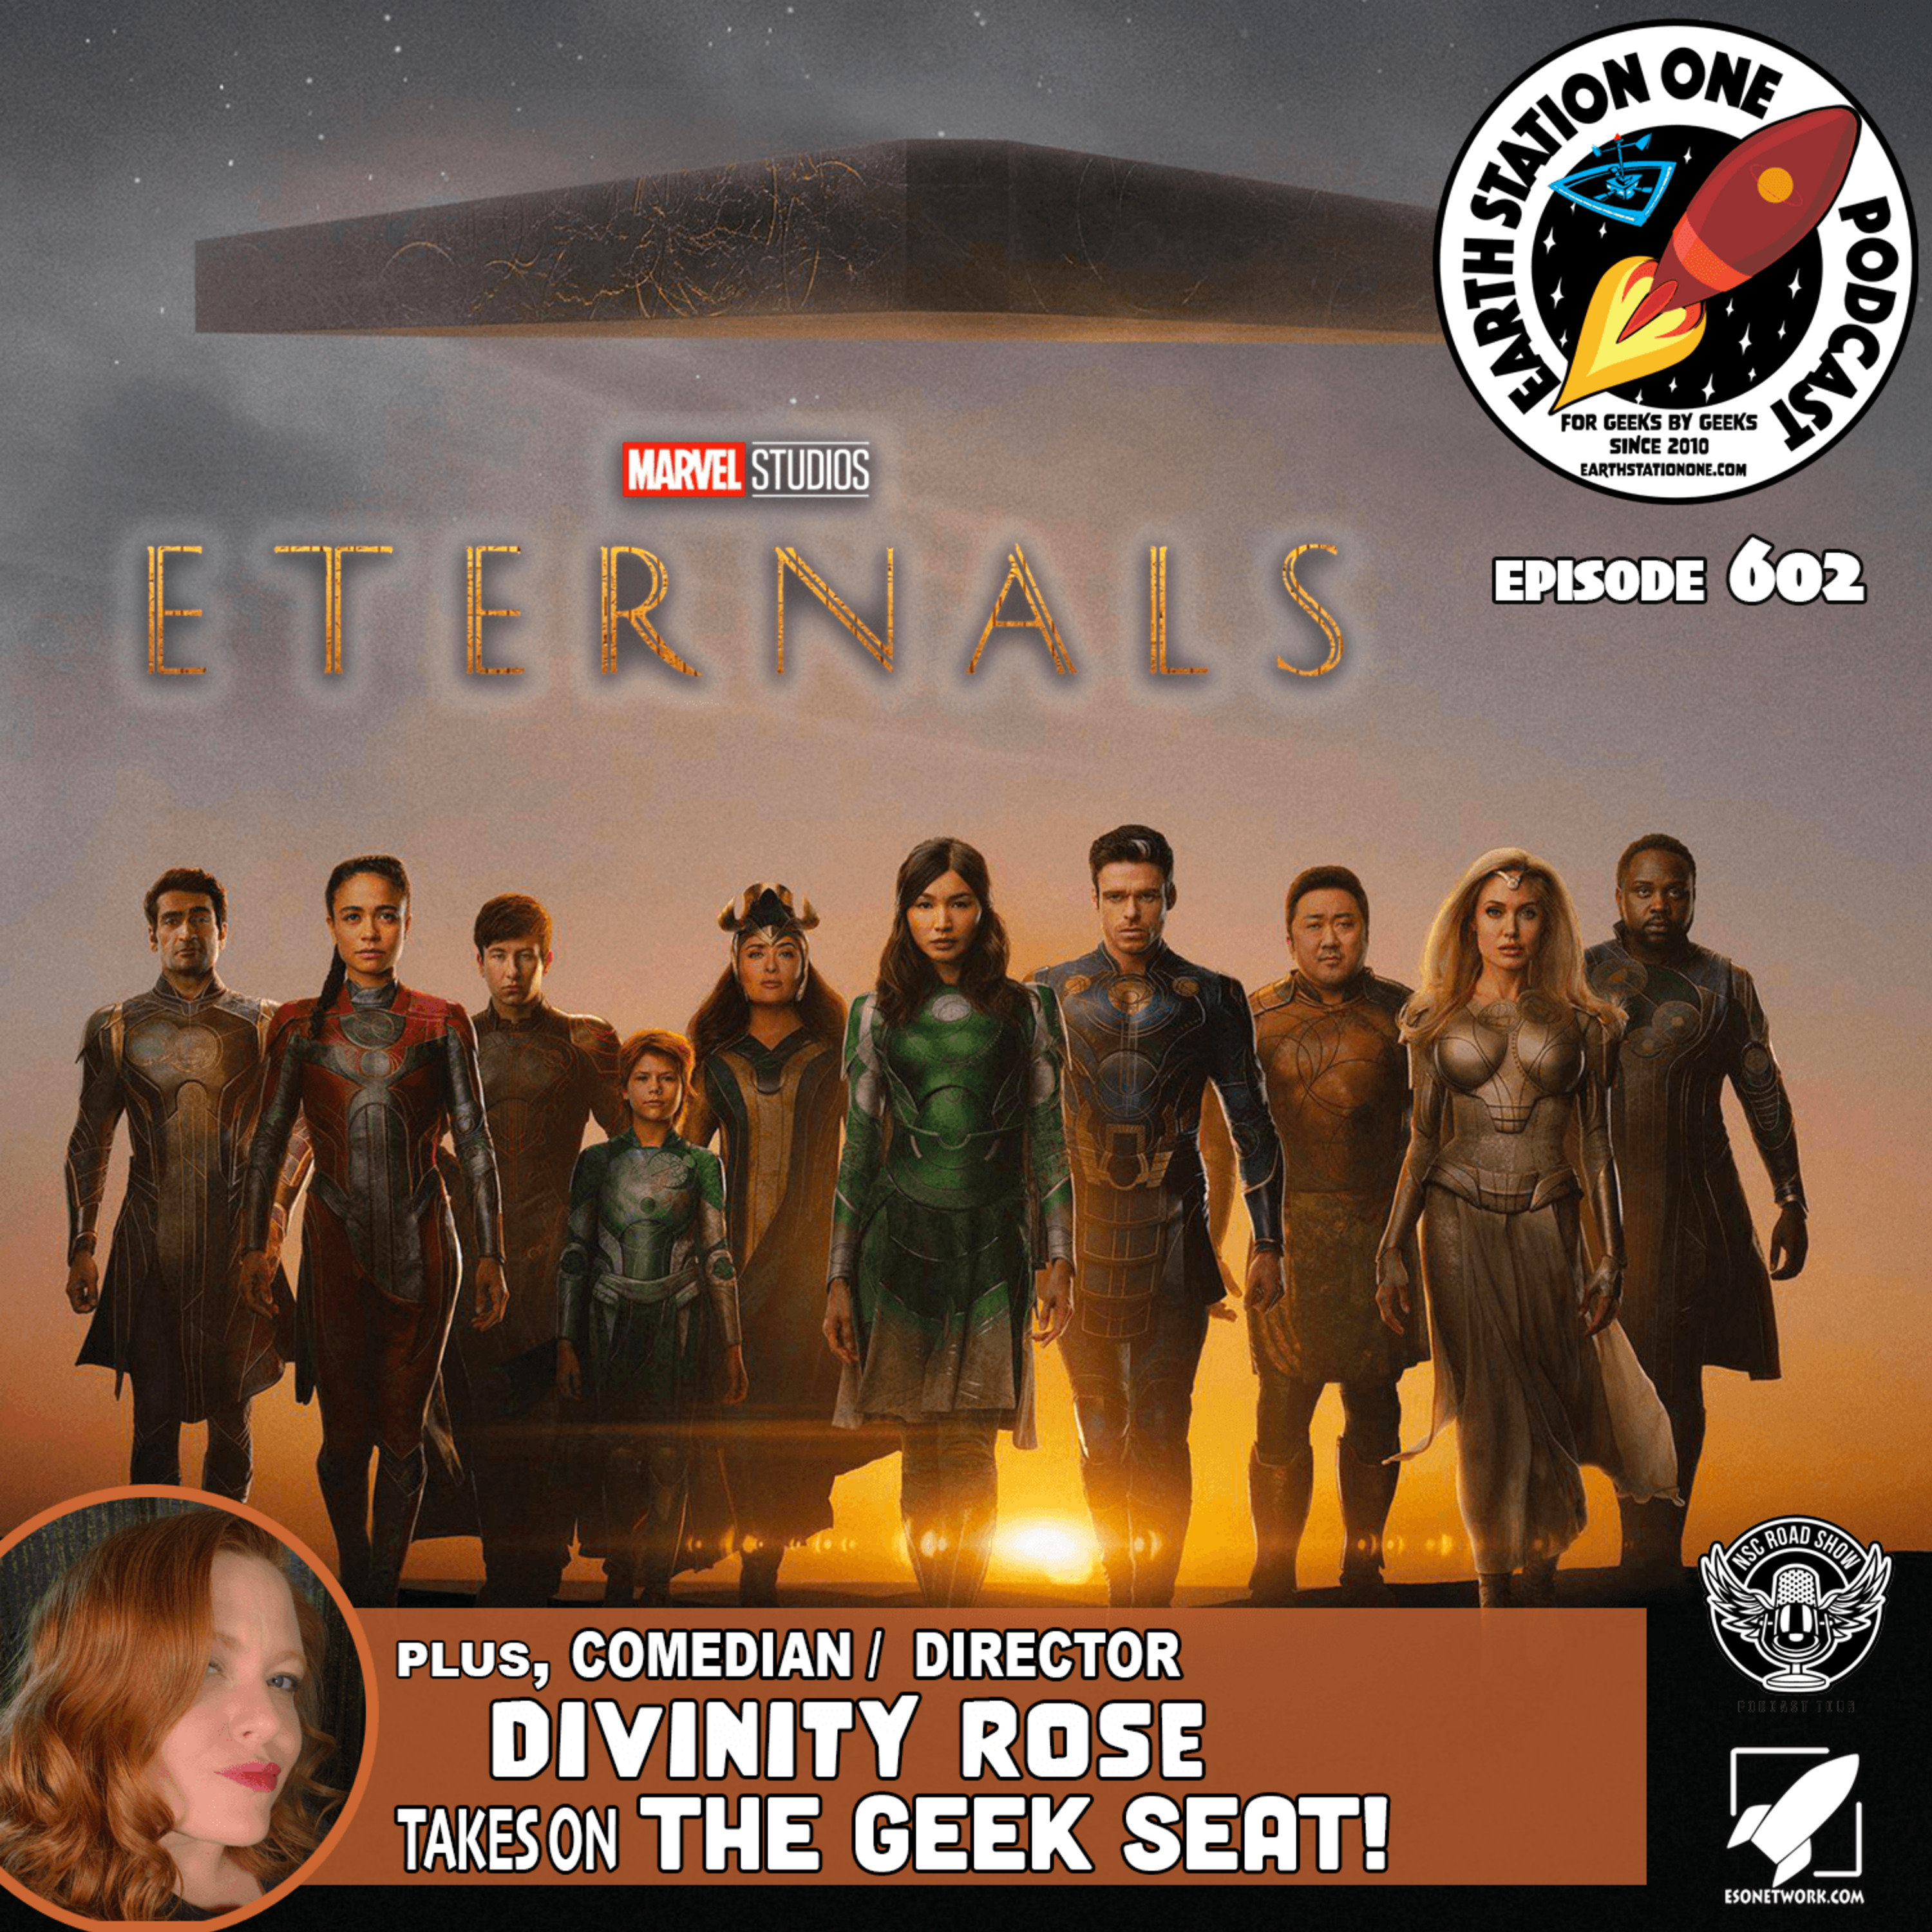 The Earth  Station One Podcast - Eternals Movie Review